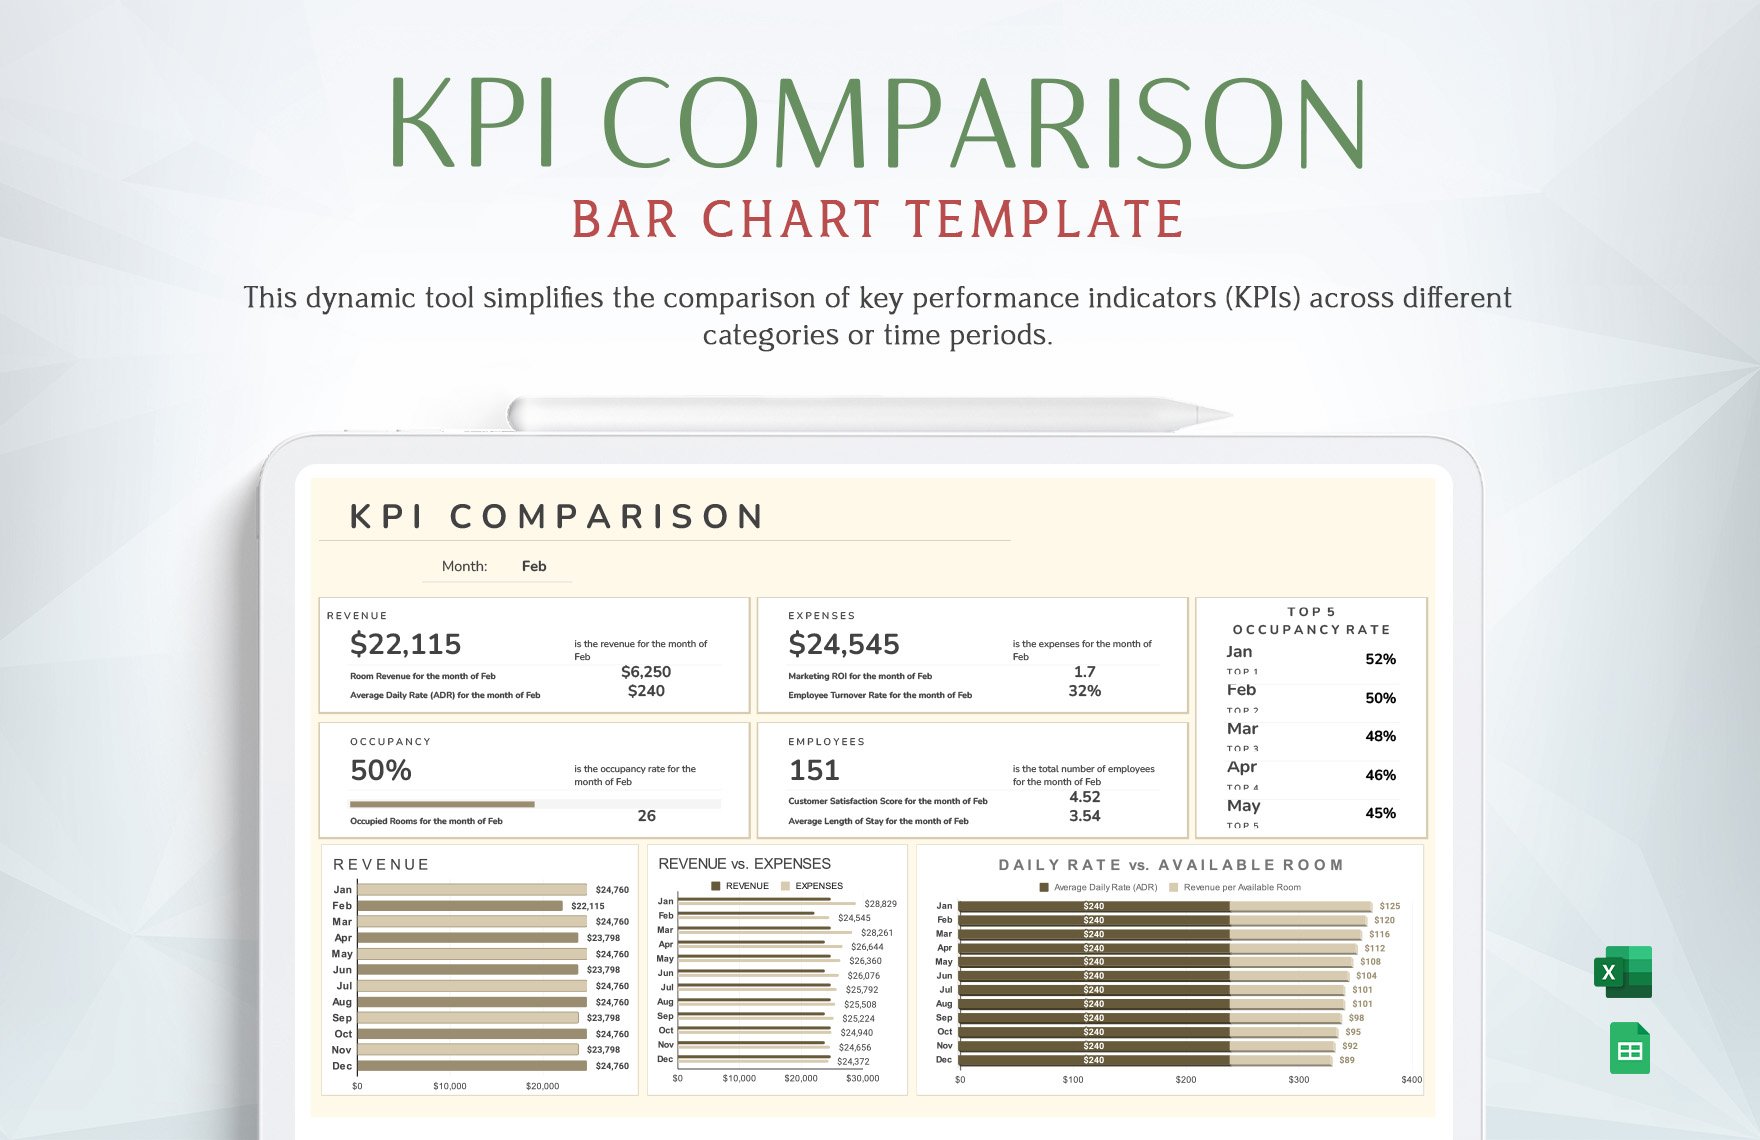 KPI Comparison Bar Chart Template in Excel, Google Sheets